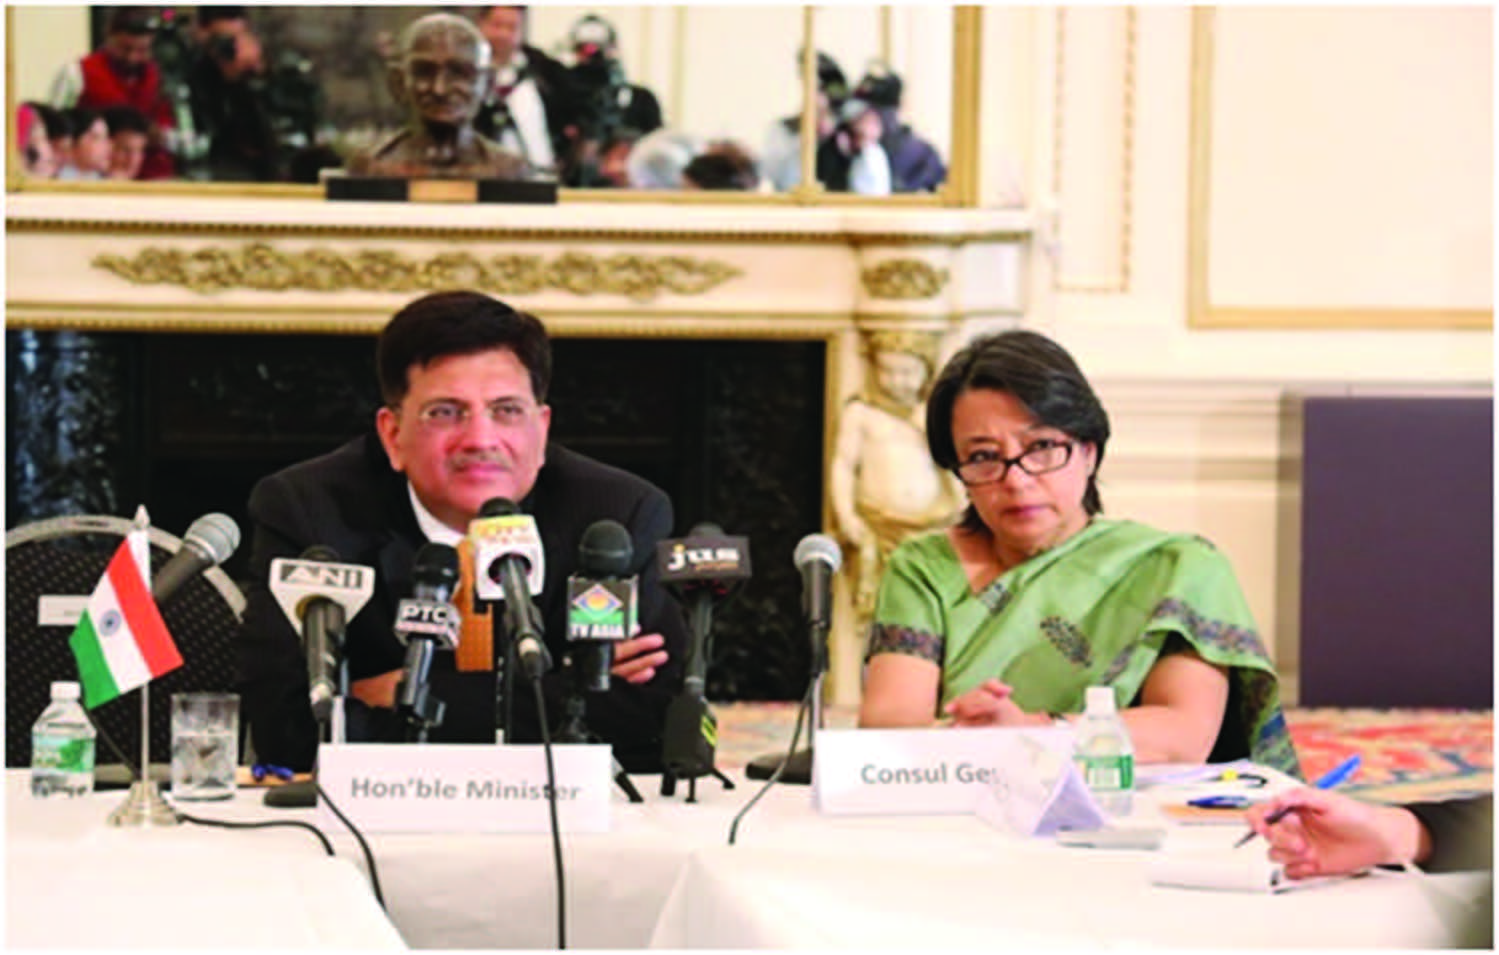 Minister spoke about various steps undertaken by Indian Government to improve energy access at a meeting with local media at the Indian Consulate on April 21. Seated with the Minister is Consul General Riva Ganguly Das